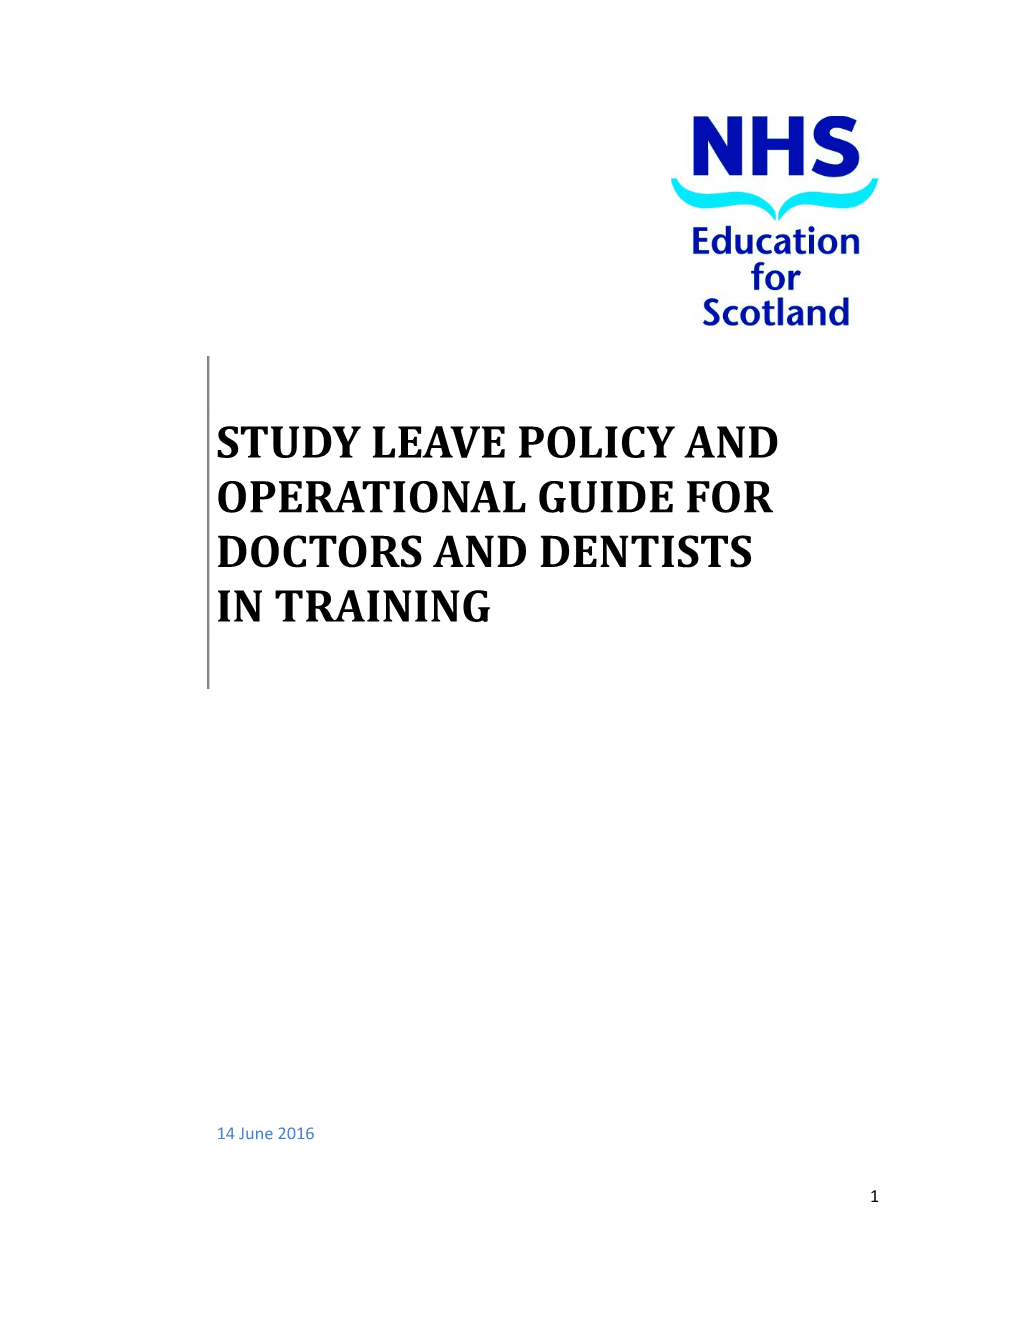 Nhs Education for Scotland